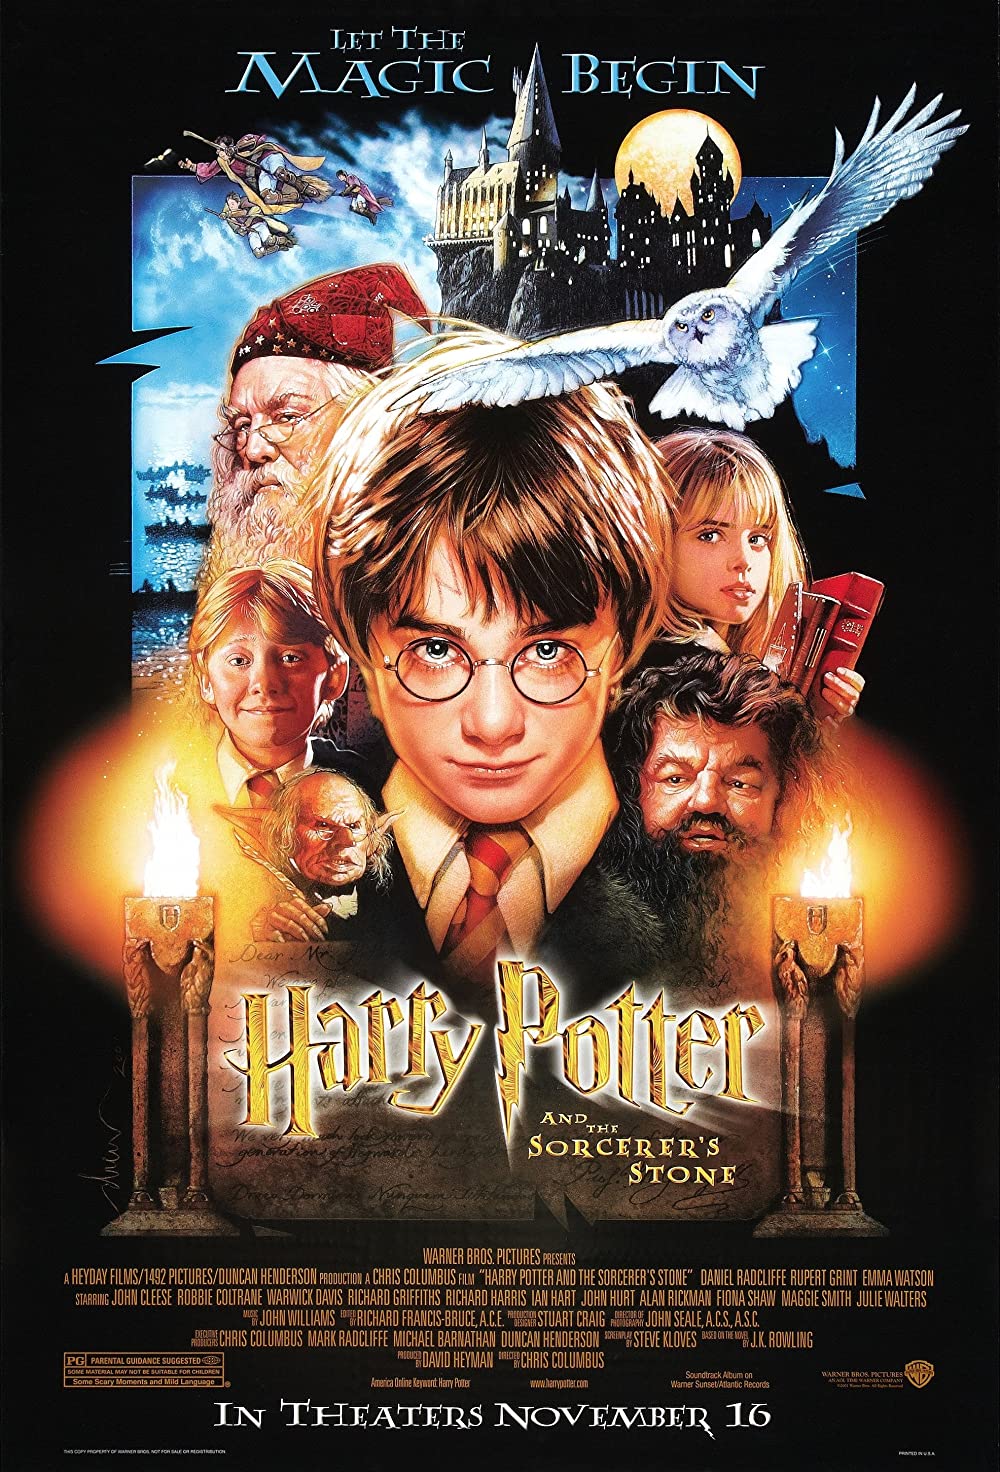 Who directed the first Harry Potter movie? 2